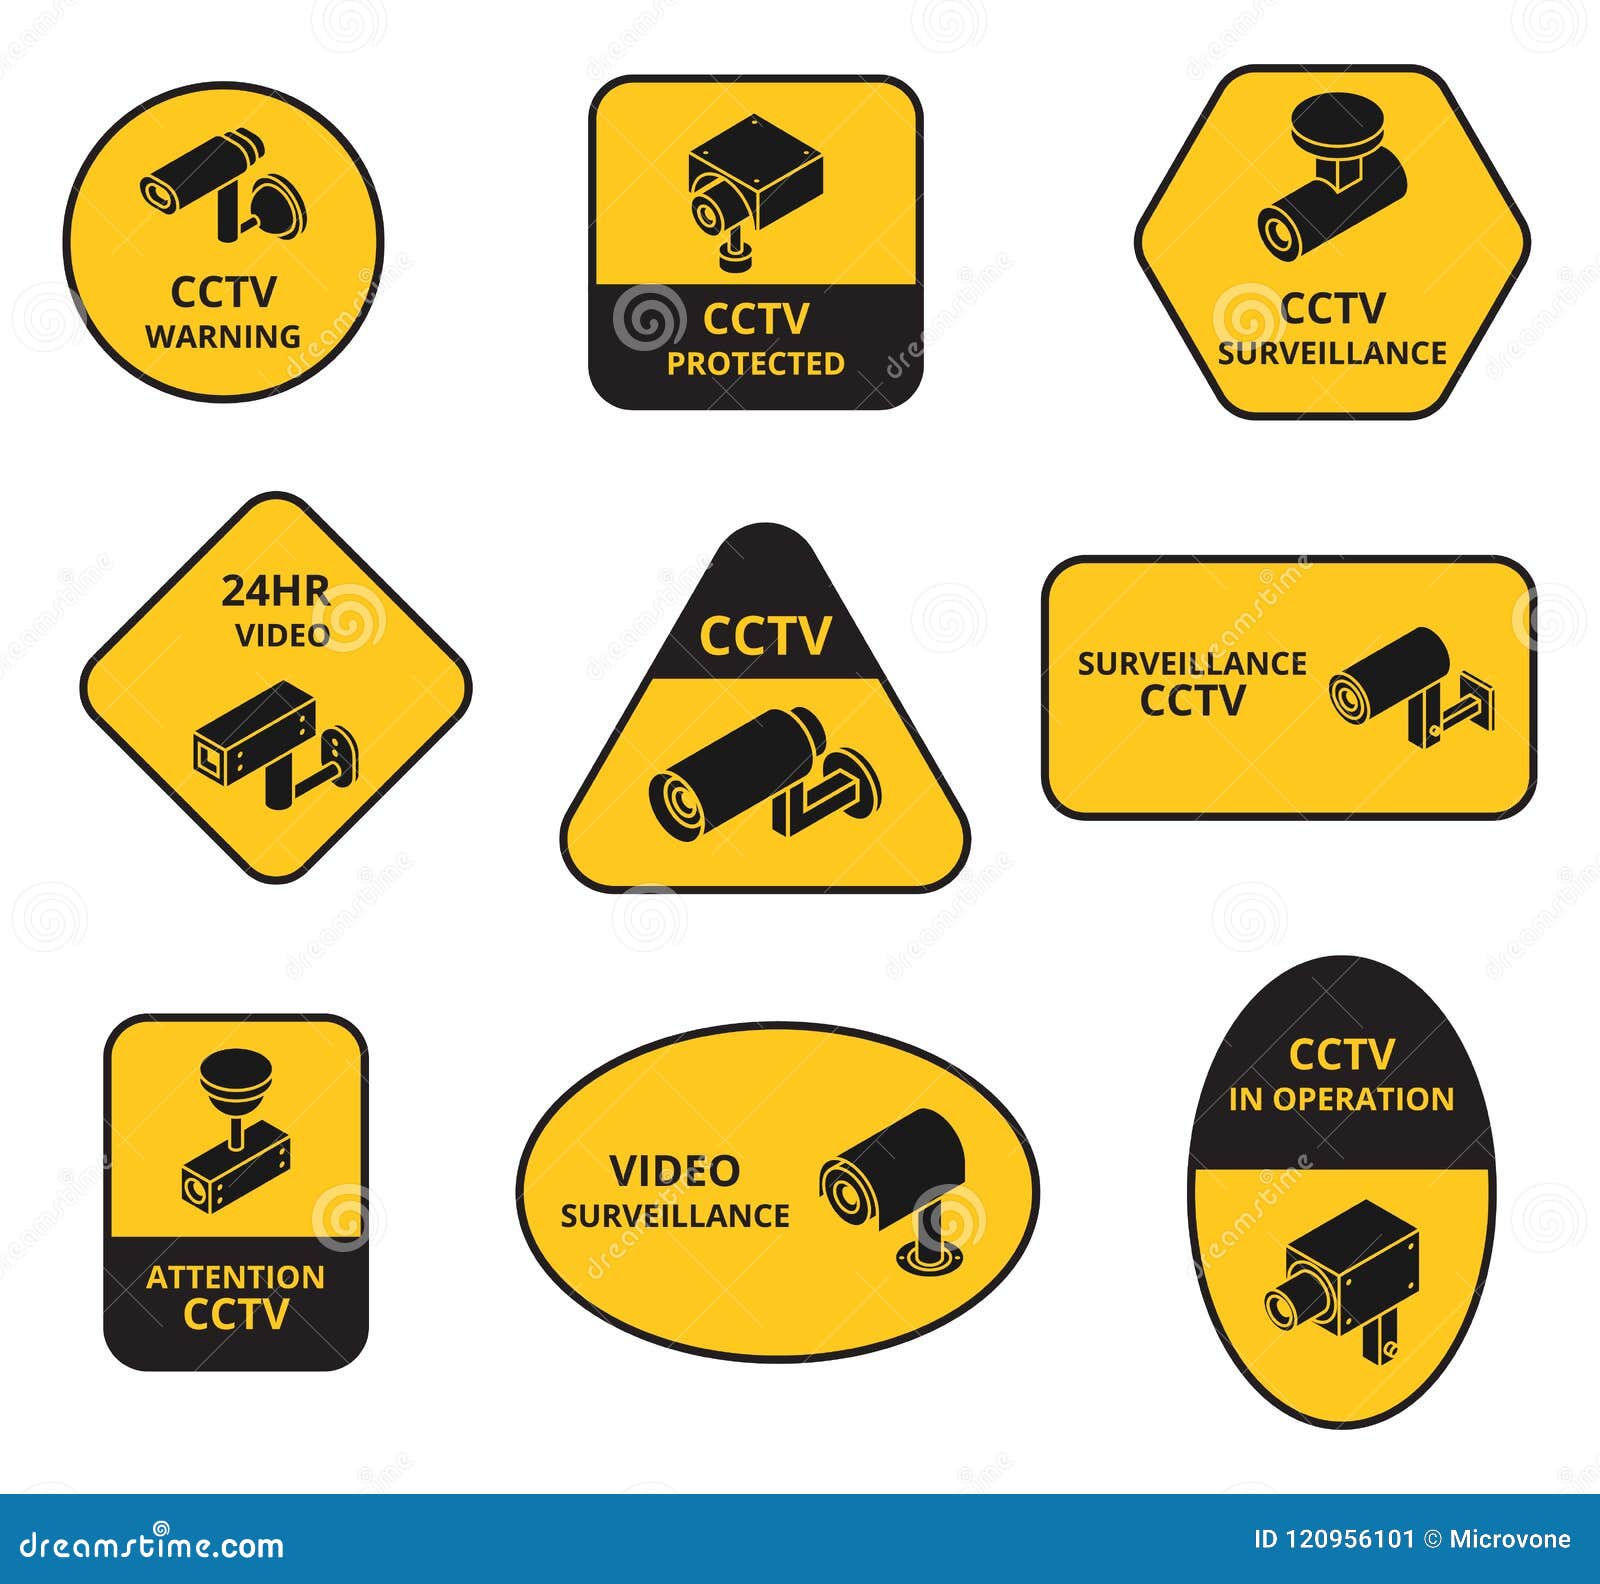 A4 CCTV Closed Circuit Television Sign 200mm x 300mm - MISC4 Sticker 